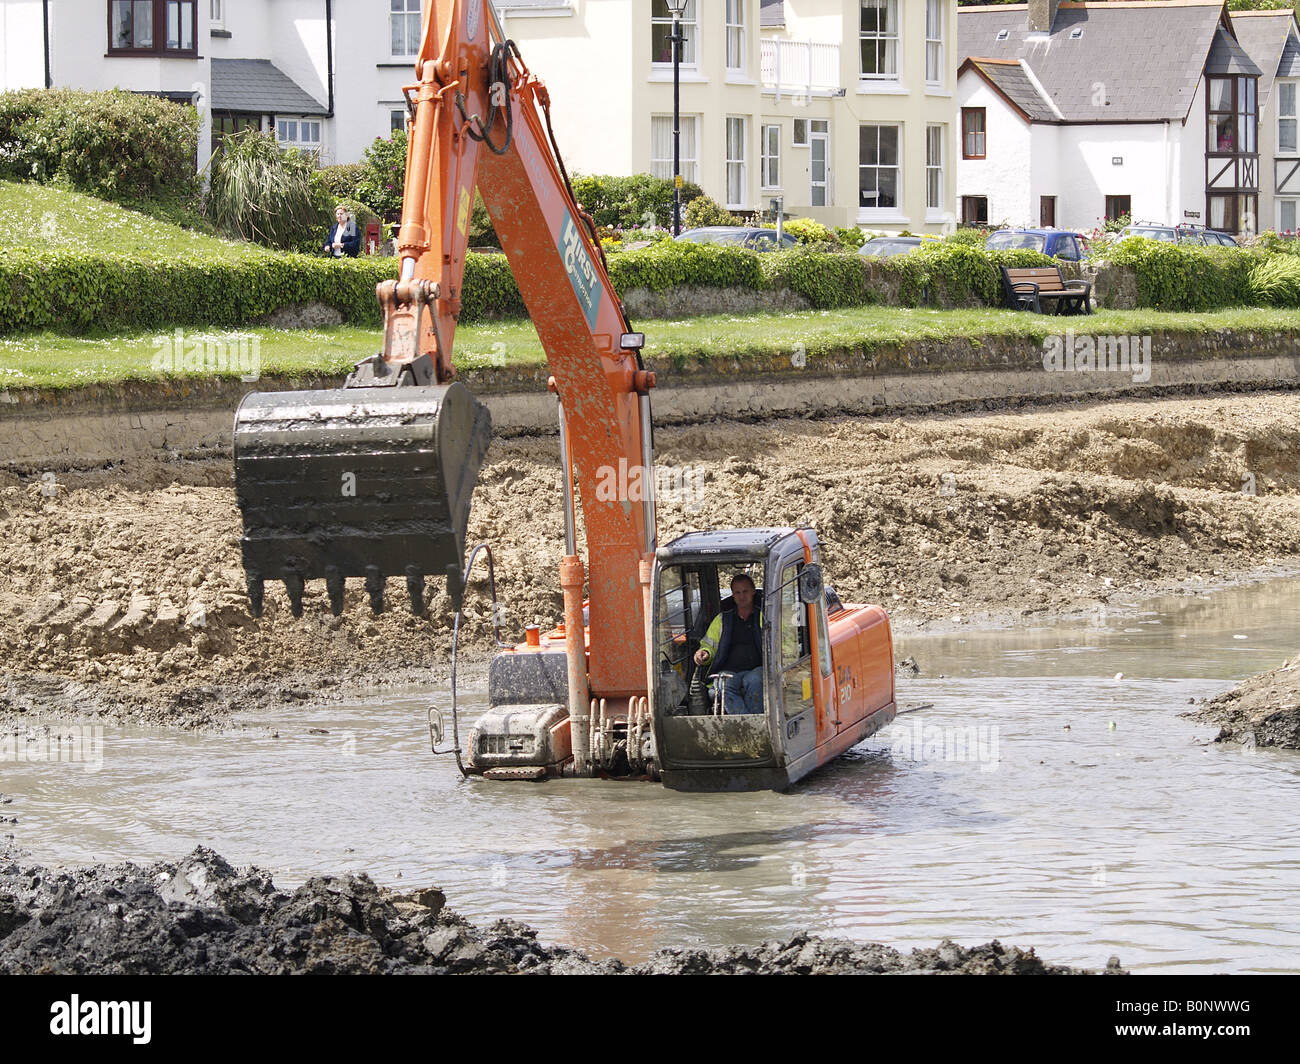 Digger working deep in the mud and water clearing out the bottom of Bude canal, Cornwall, UK Stock Photo